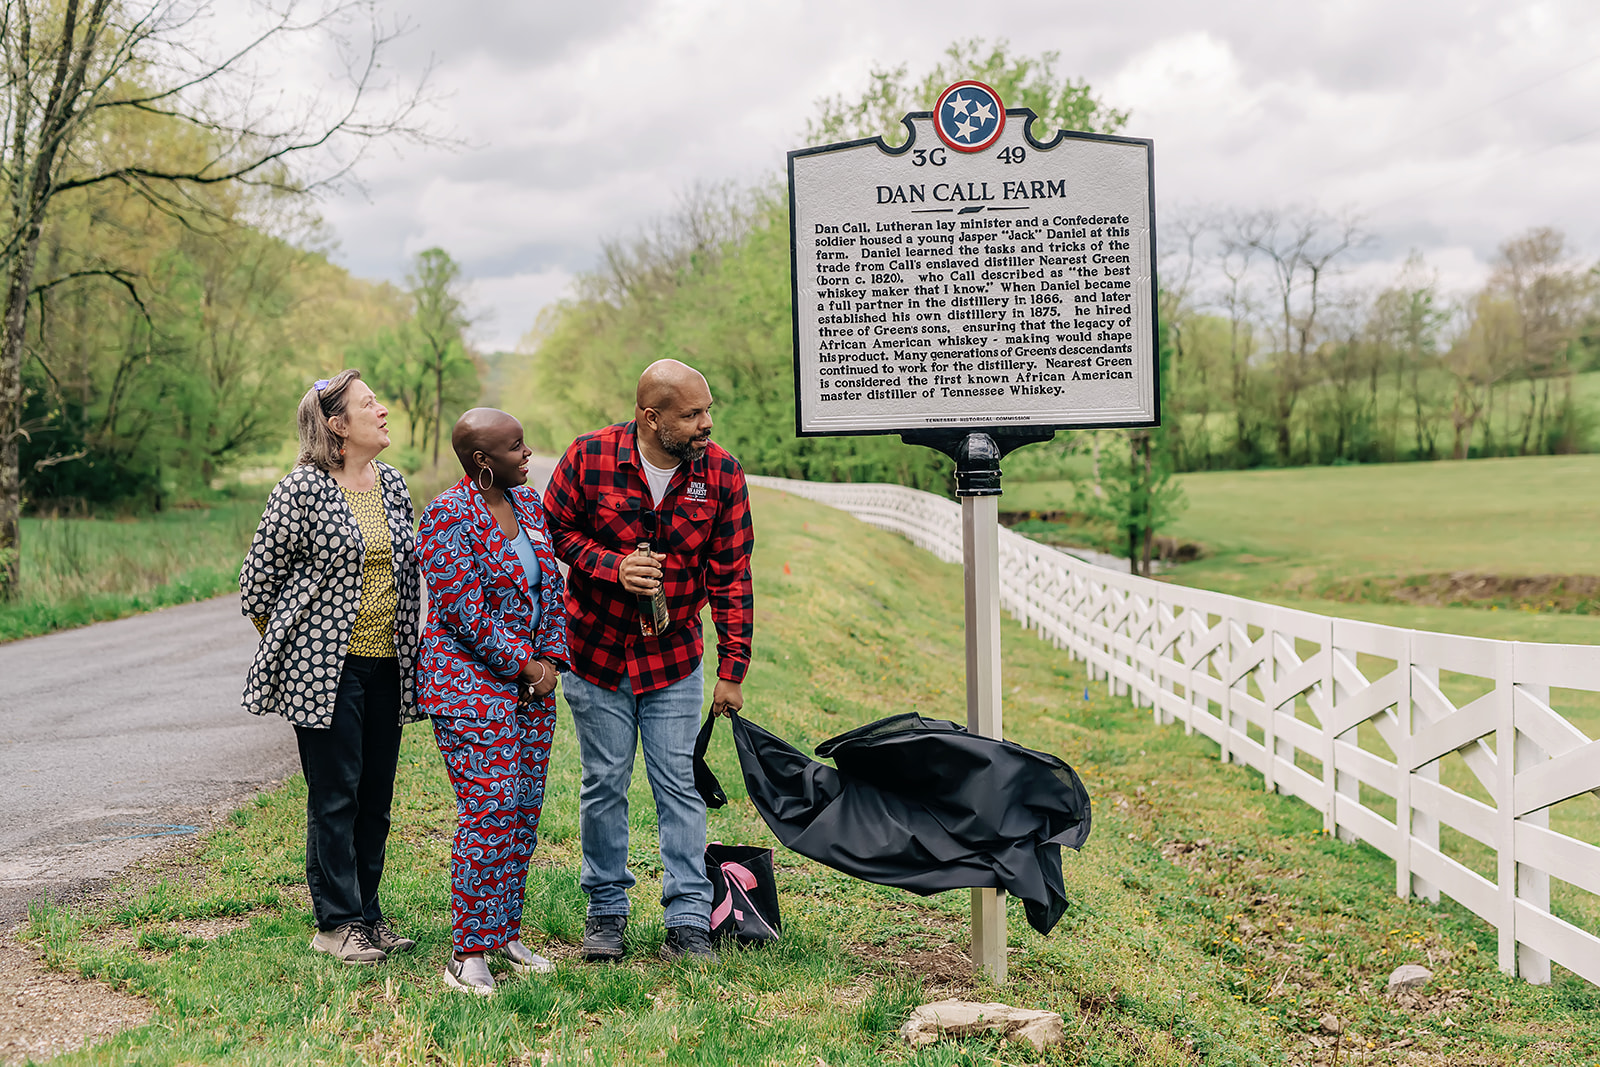 TPL President Diane Regas, Black History and Culture Director Jocelyn Imani stand next to and Board Member Keith Weaver as he unveils a roadside marker for the historic Dan Call Farm in Tennessee.